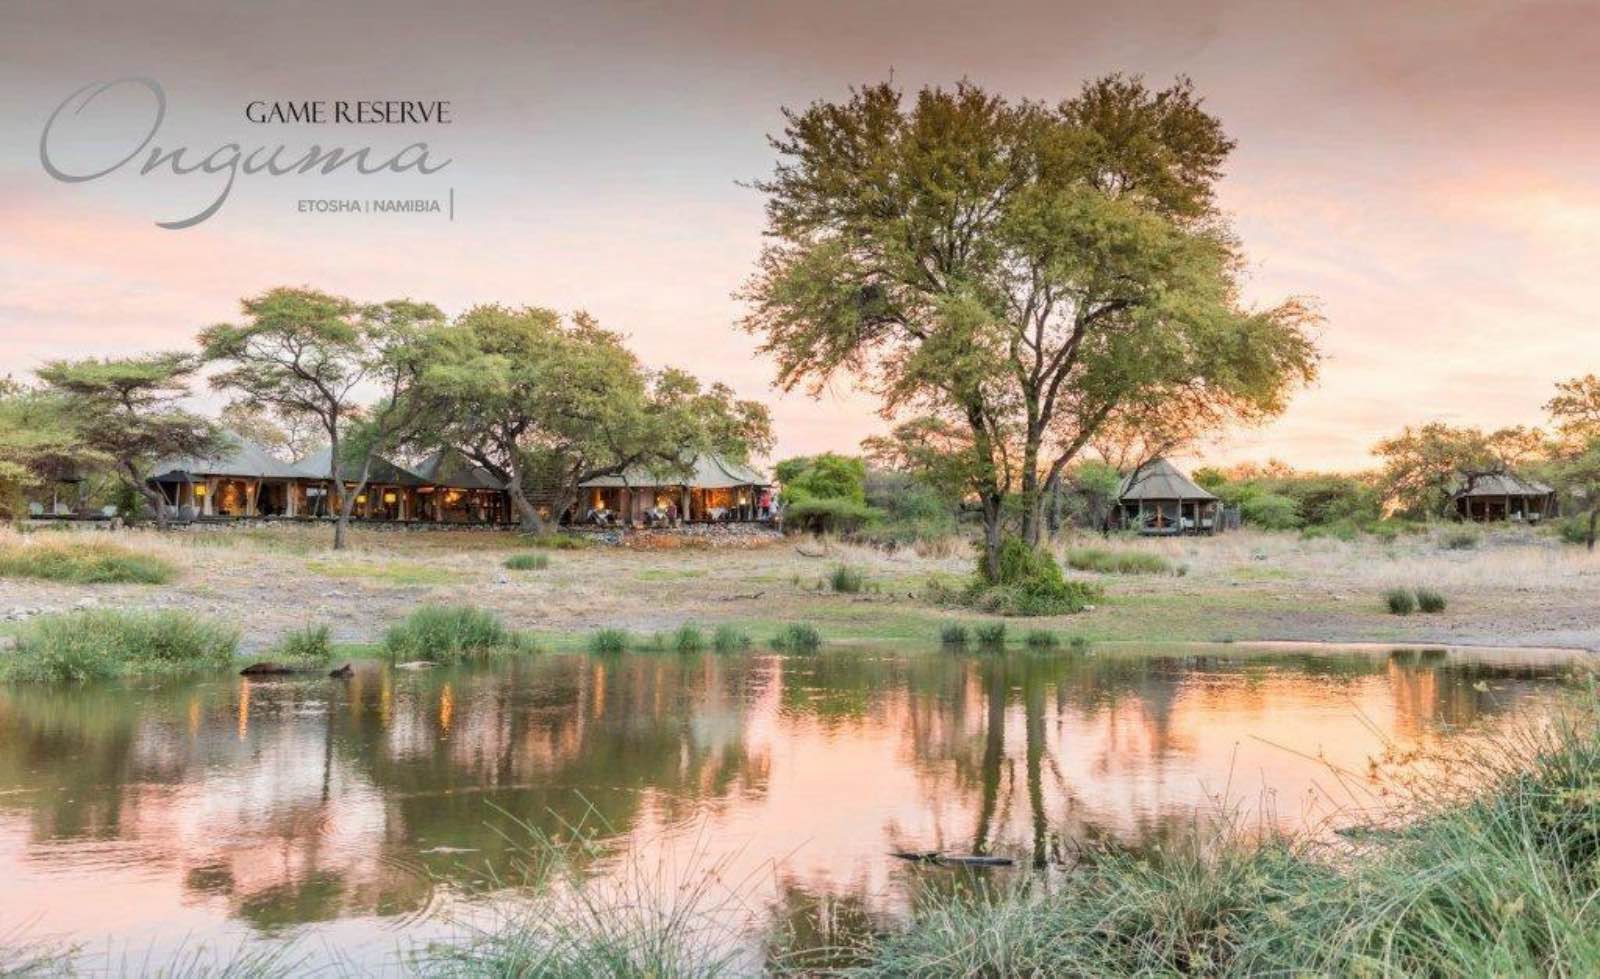 Onguma Tented Camp overlooking a busy waterhole